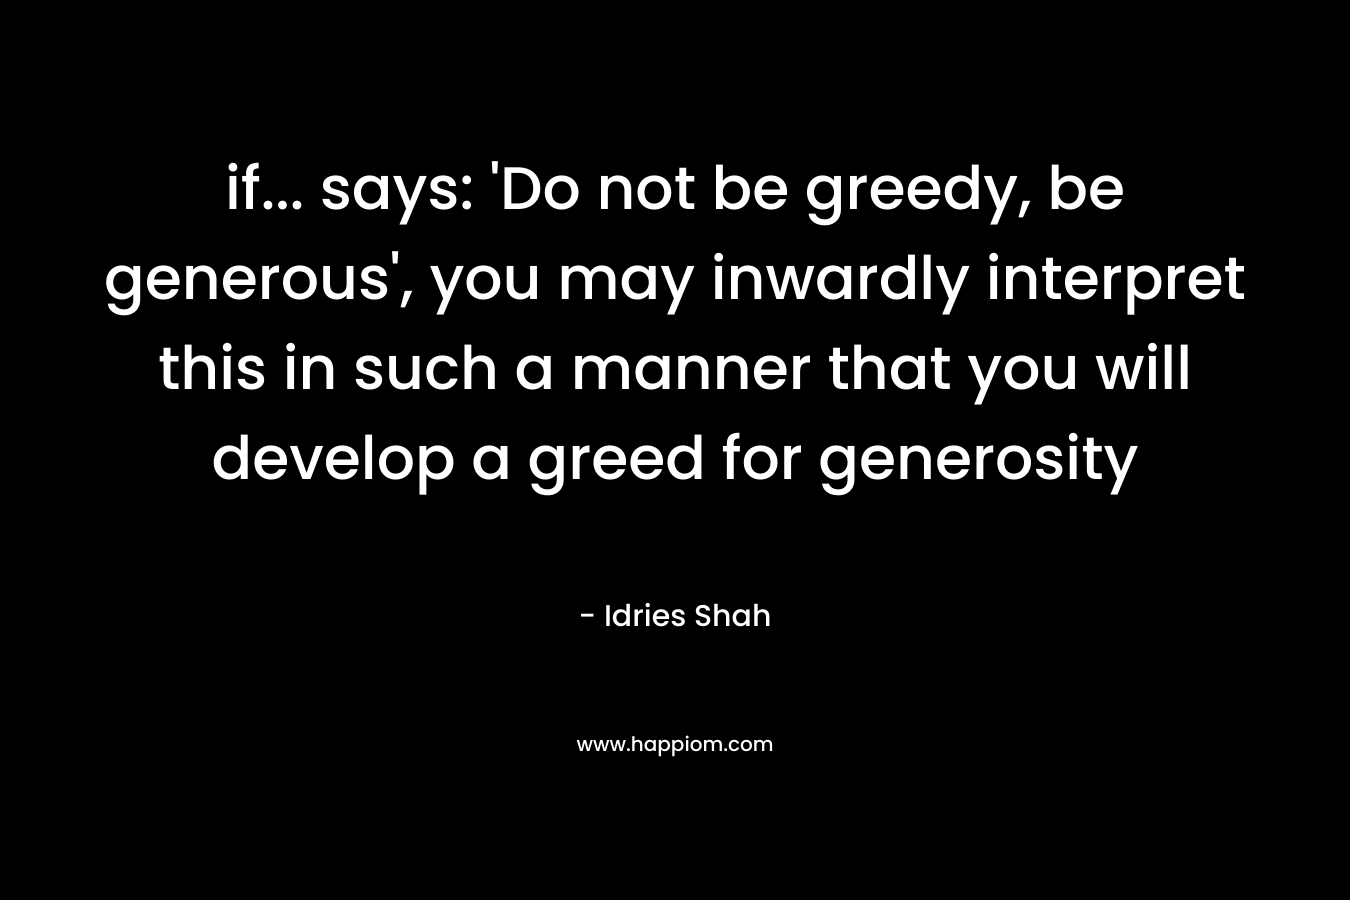 if... says: 'Do not be greedy, be generous', you may inwardly interpret this in such a manner that you will develop a greed for generosity